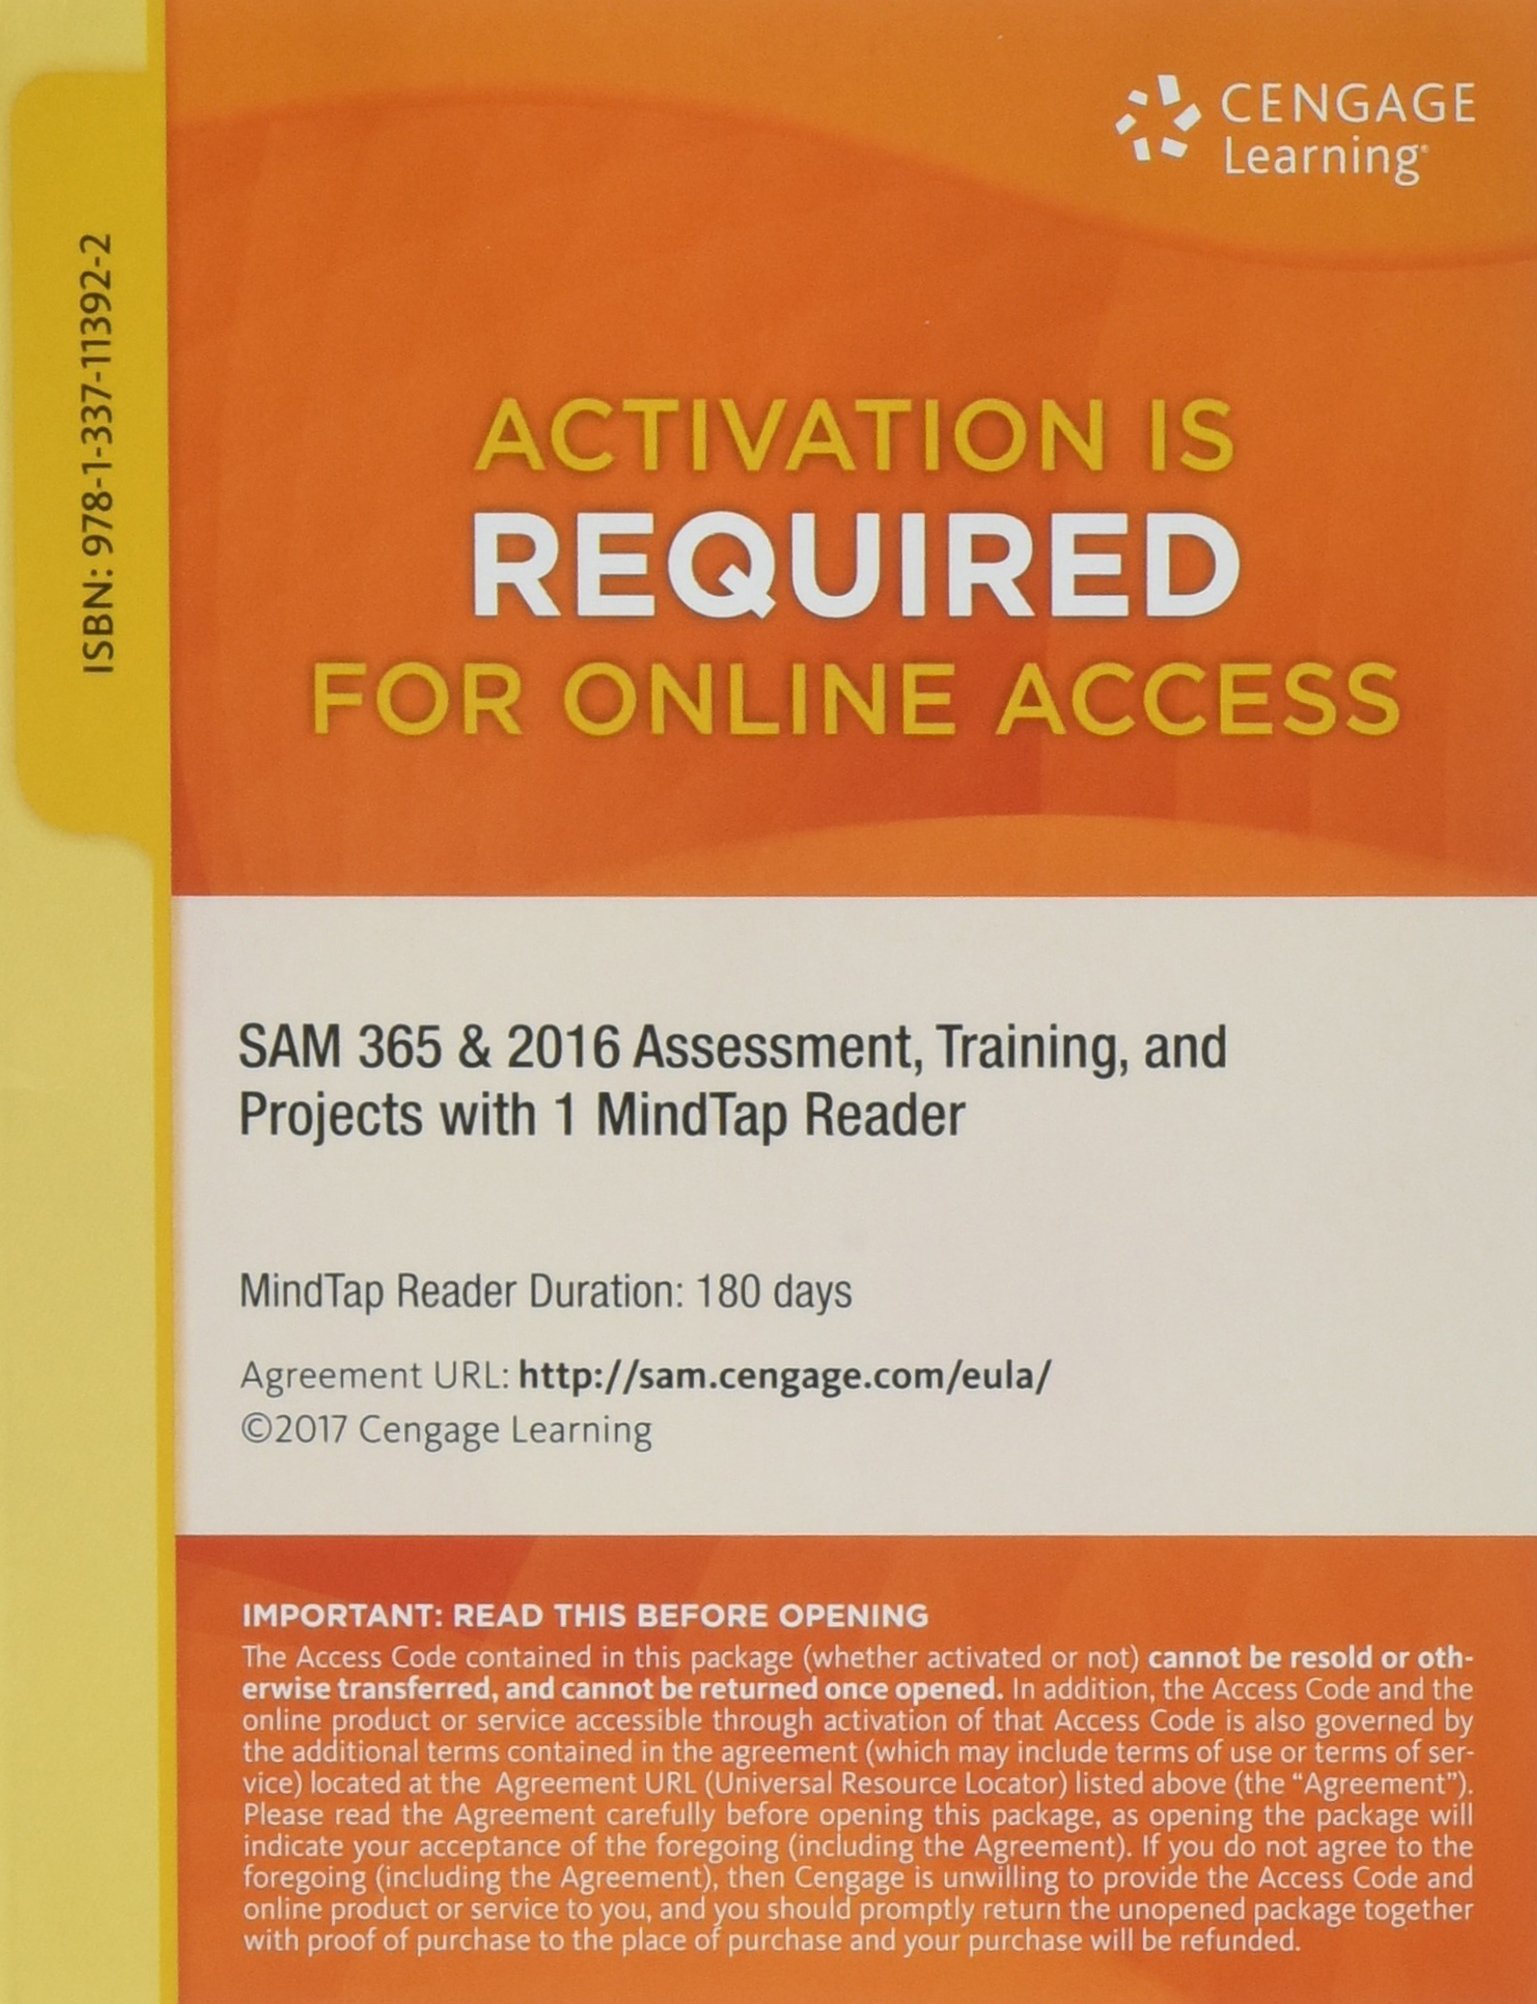 Sam 365 & 2016 Asesment, Training, and Projects With 1 Mindtap Reader